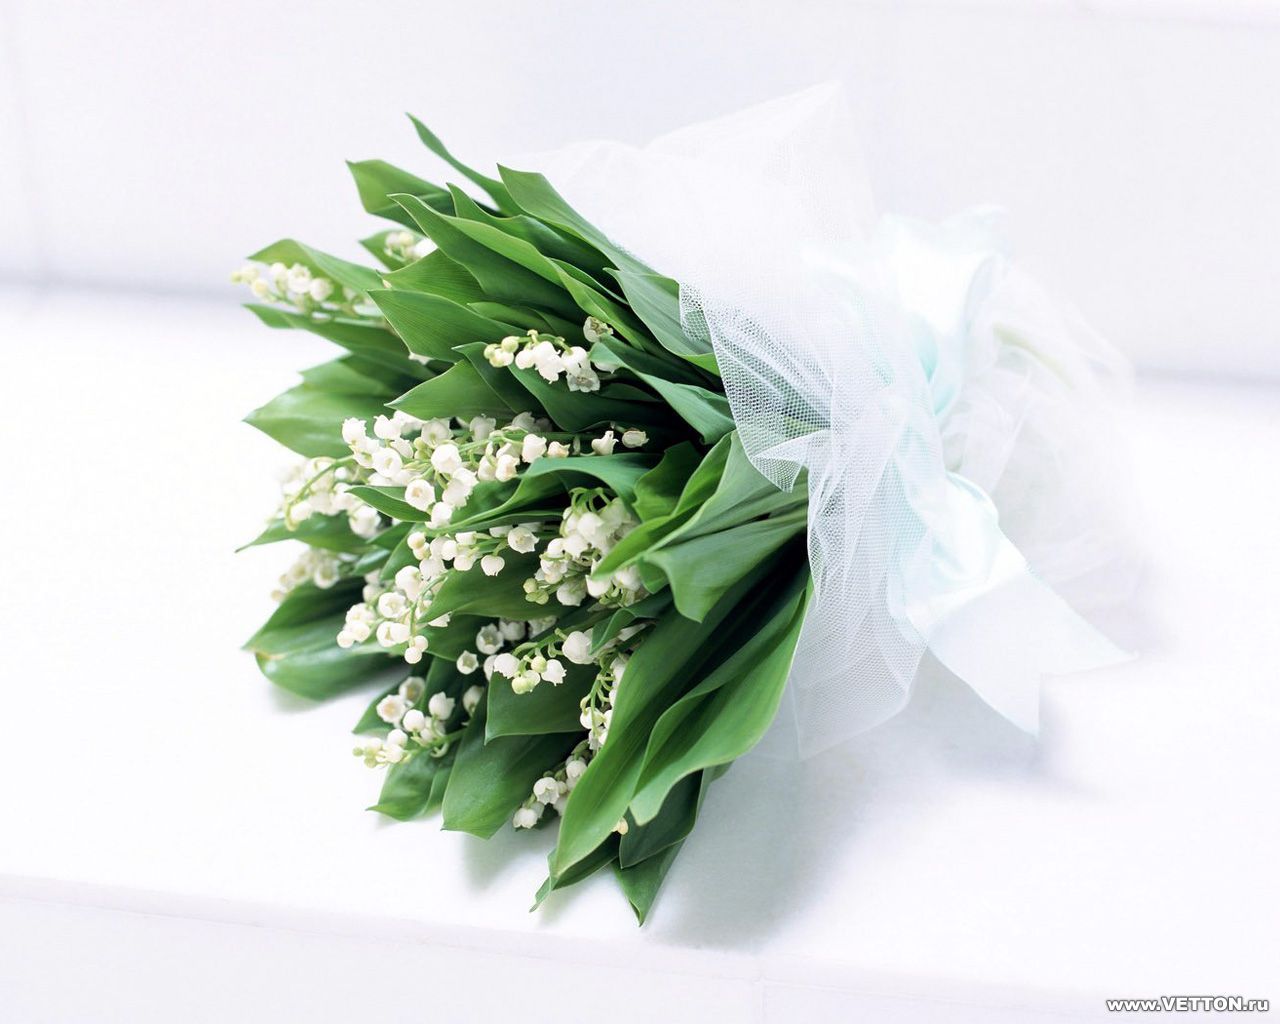 plants, flowers, lily of the valley